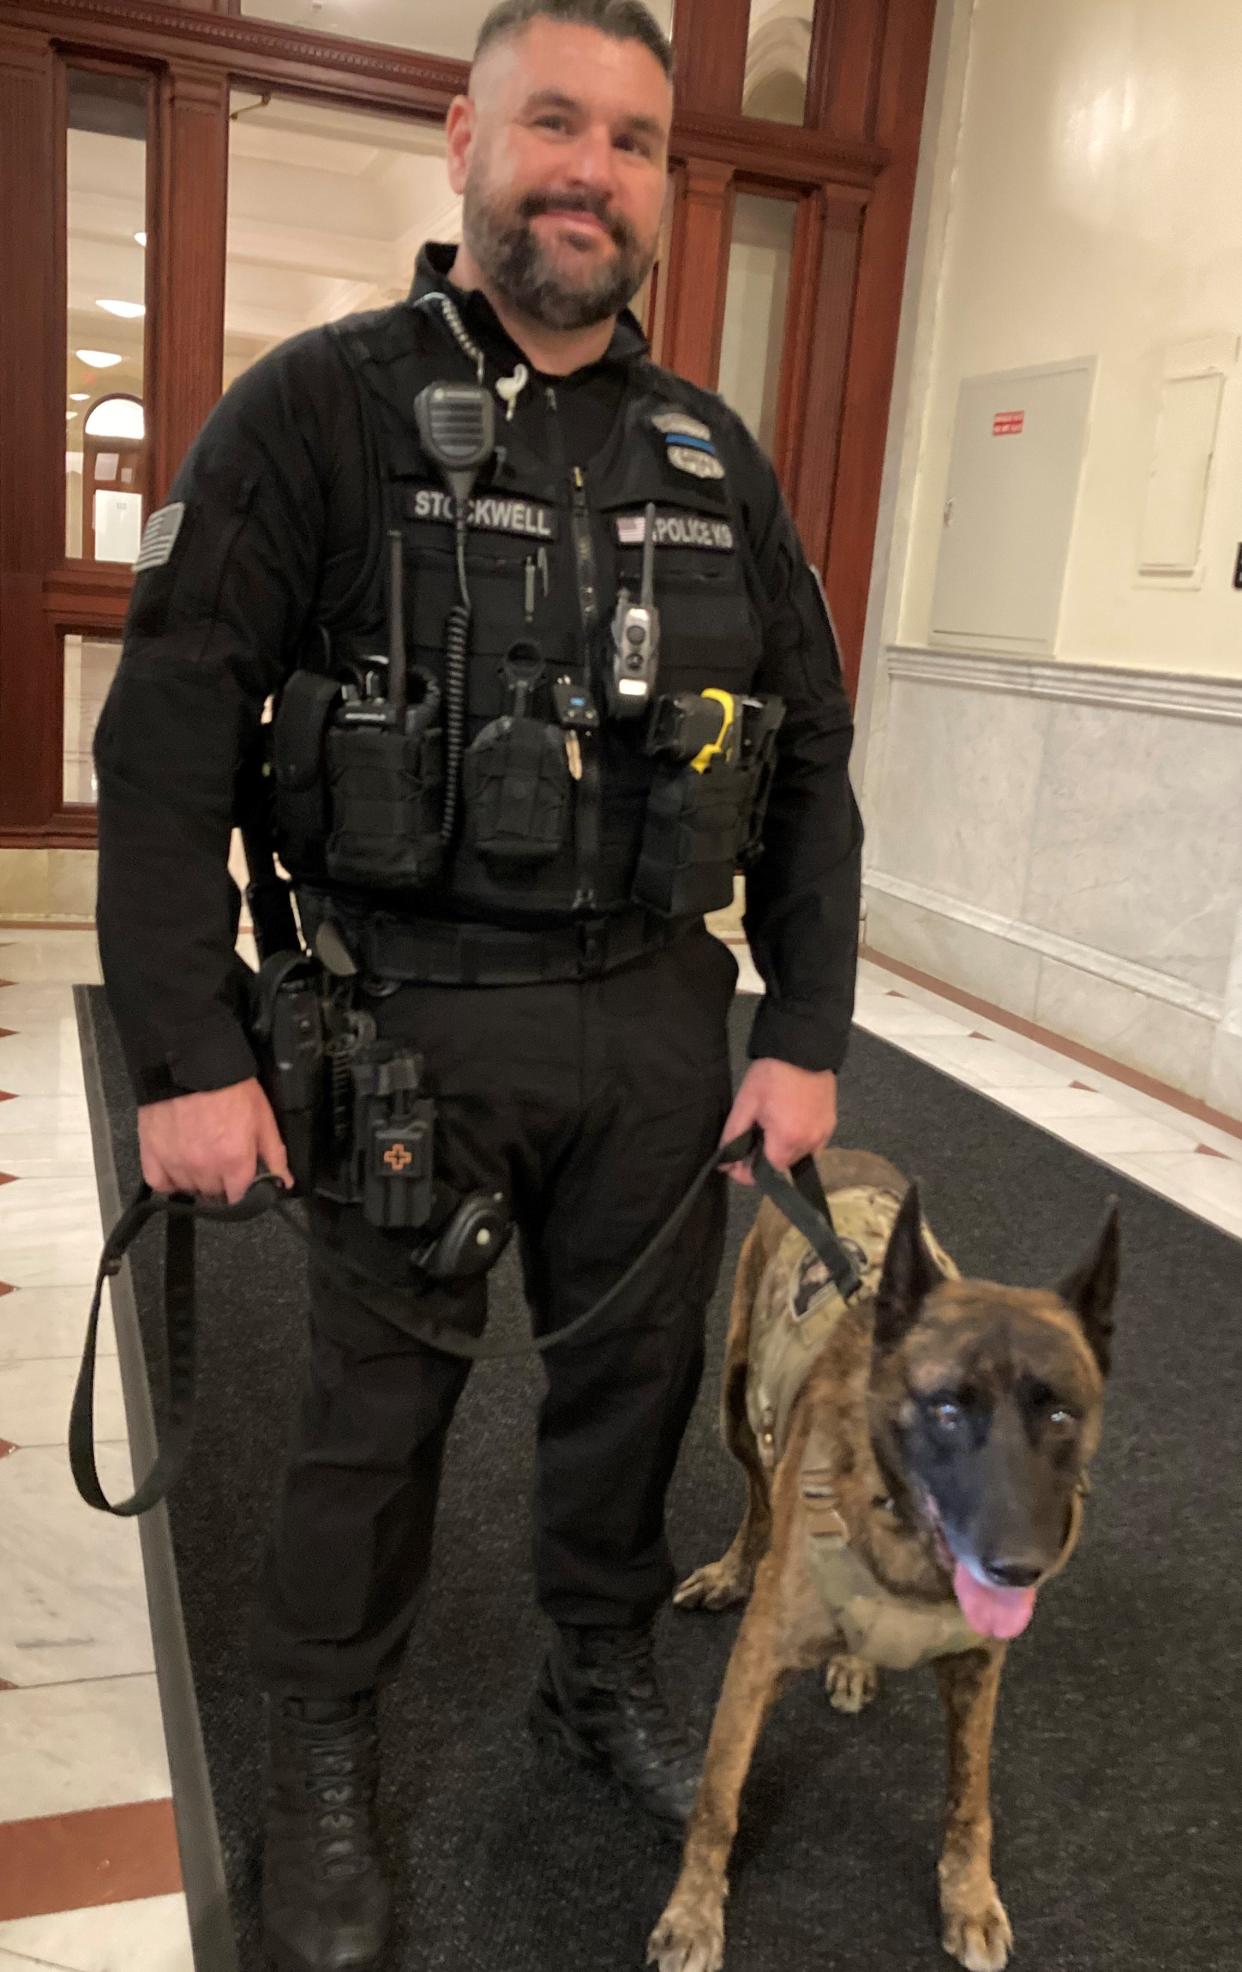 Uxbridge Officer Tom Stockwell, with his partner, Bear, testified before the Joint Committee on Public Safety and Homeland Security Monday, about establishing the right to offer advanced life support medical treatment for injured police dogs.